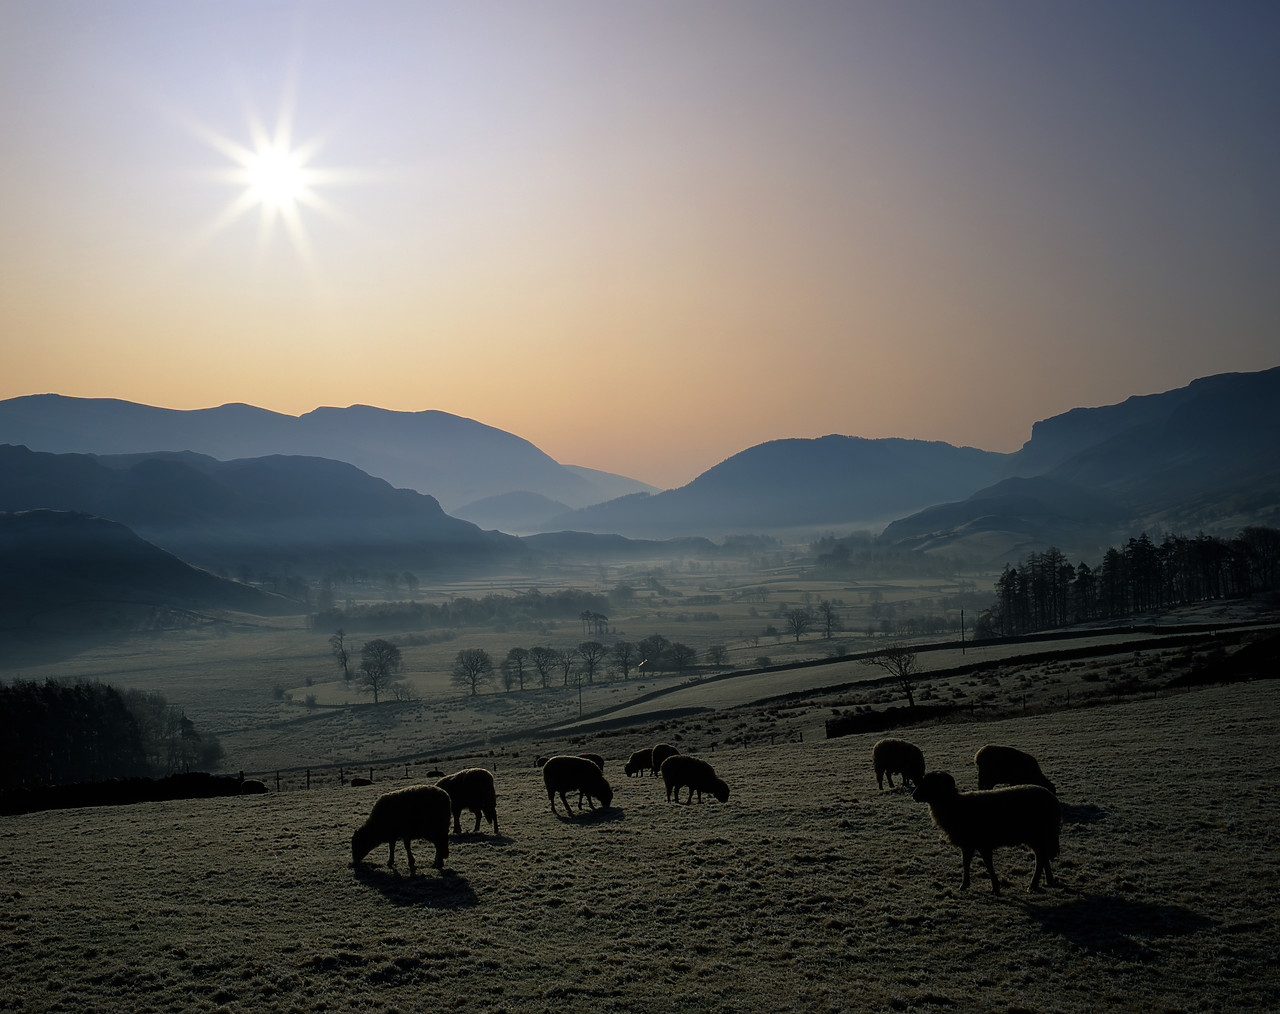 #923895-1 - Morning Frost with Grazing sheep, near Keswick, Lake District, Cumbria, England